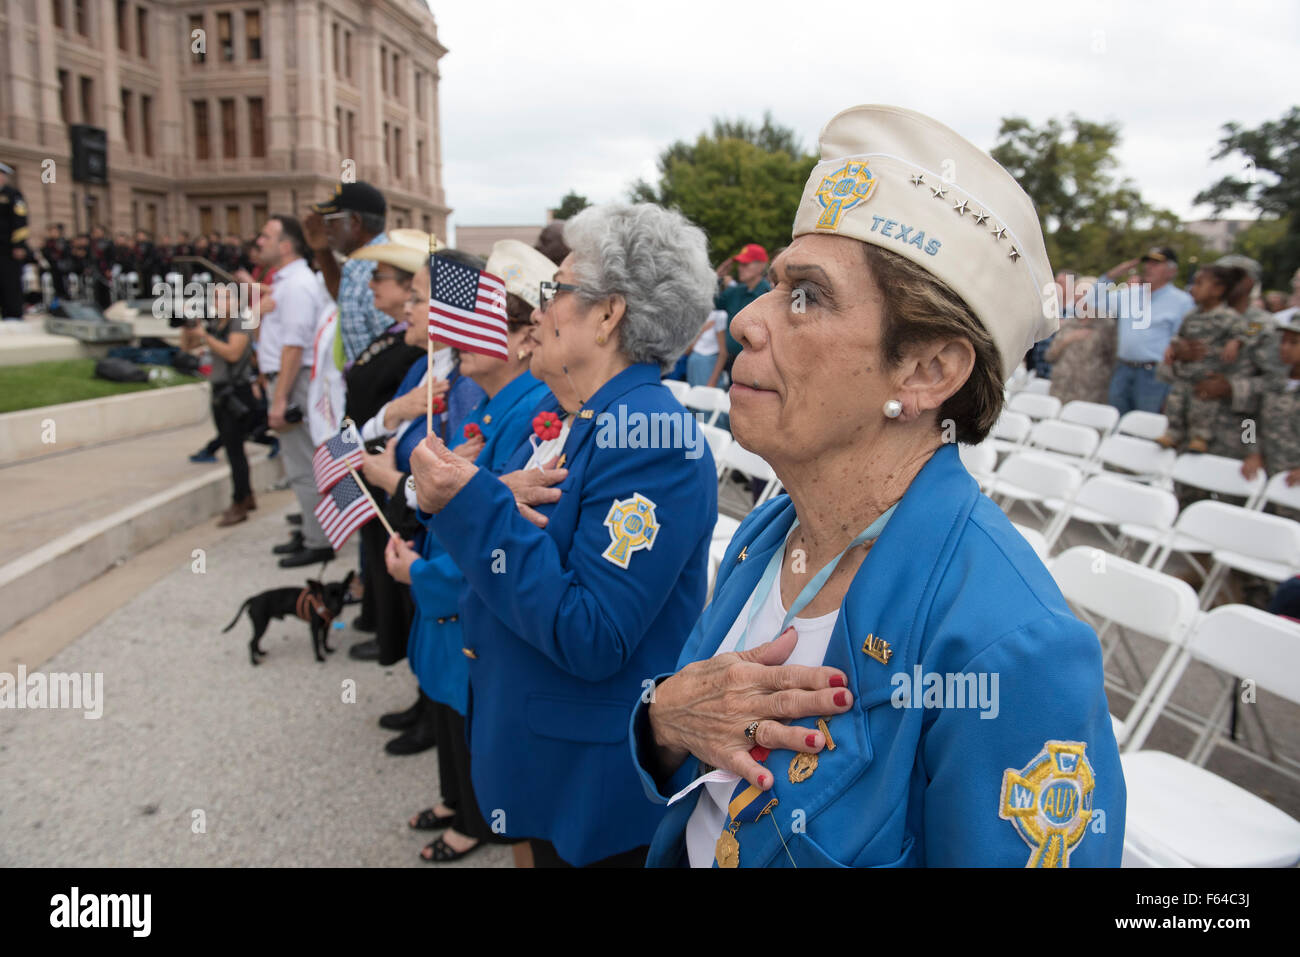 Austin, Texas USA November 11, 2015: Catholic War Veterans Auxiliary members pay their respects  during the Veteran's Day parade up Congress Avenue and ceremony at the Texas Capitol. Several thousand Texans lined Congress Avenue to witness military heroes, marching bands and floats in the annual parade. Credit:  Bob Daemmrich/Alamy Live News Stock Photo